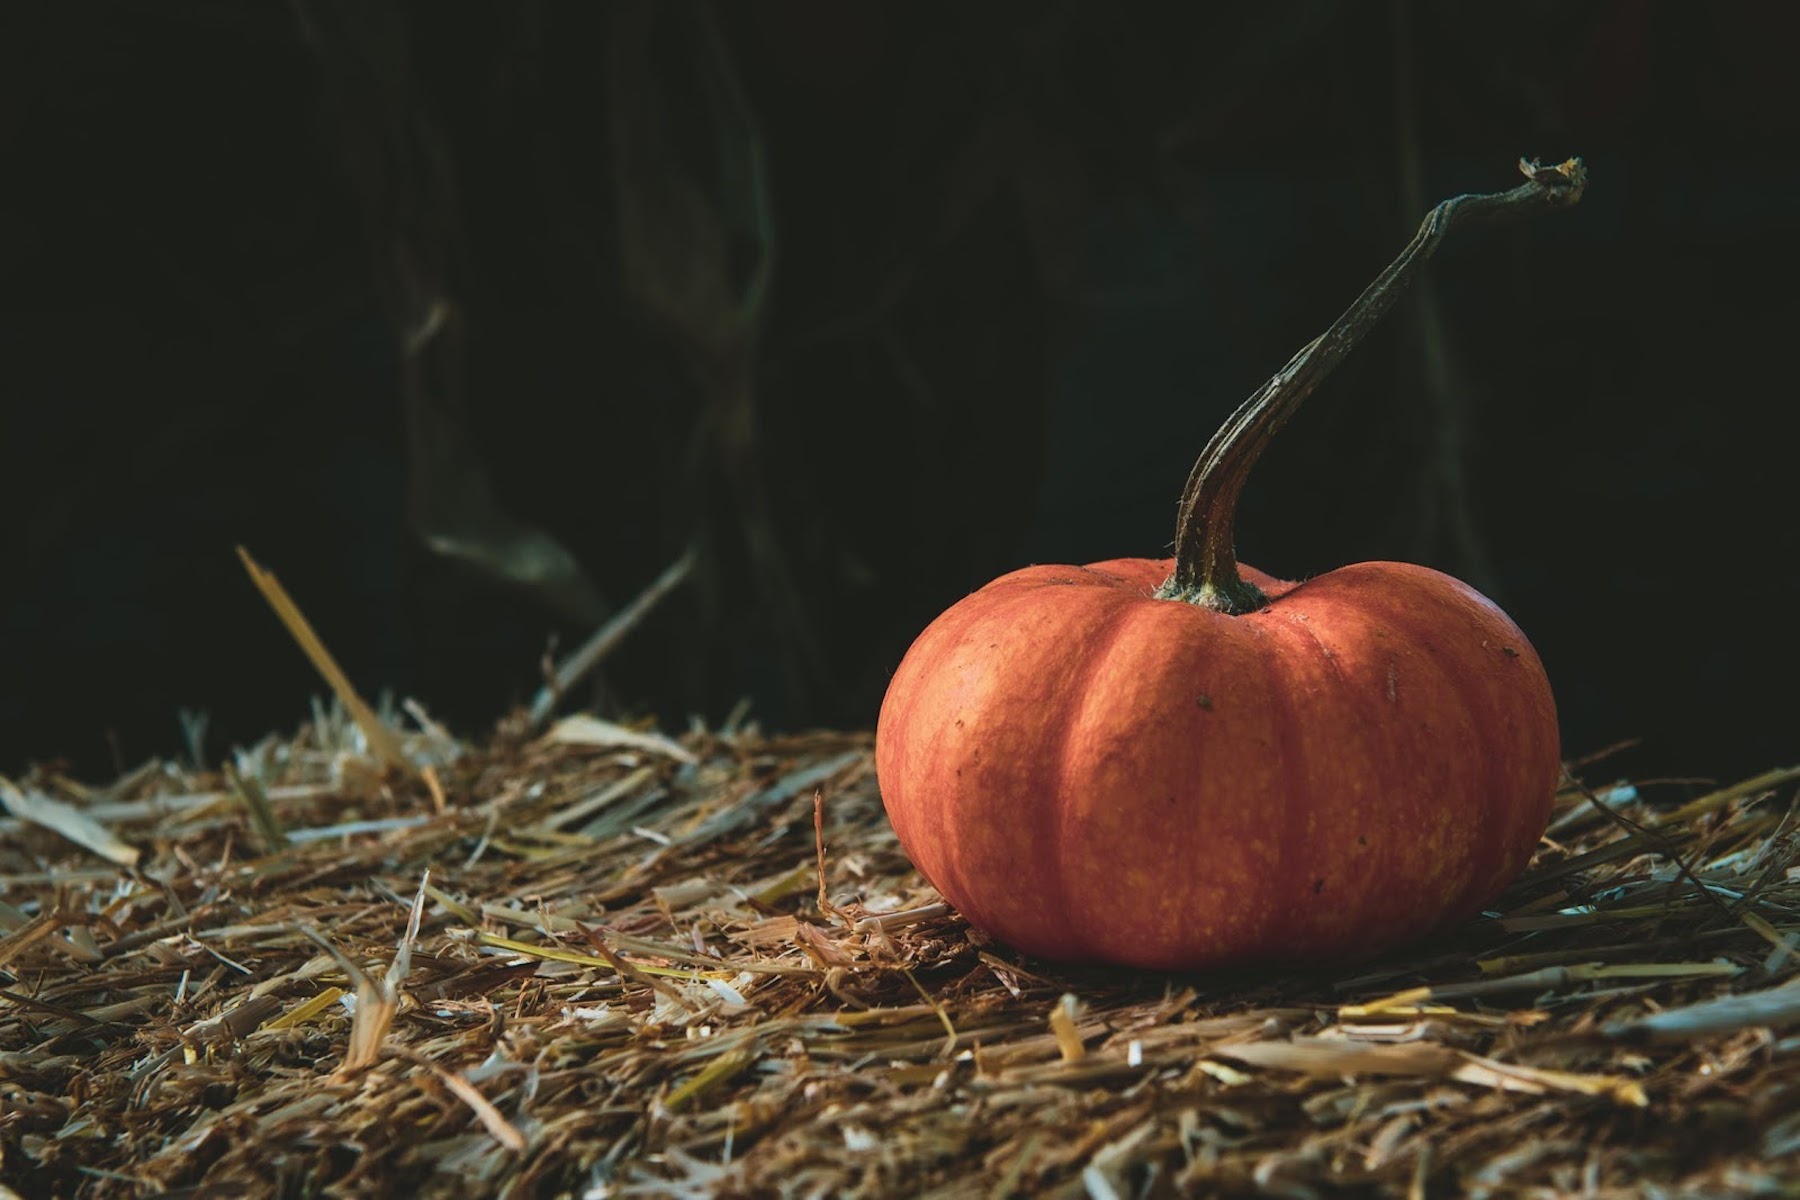 Properties of the pumpkin on the skin